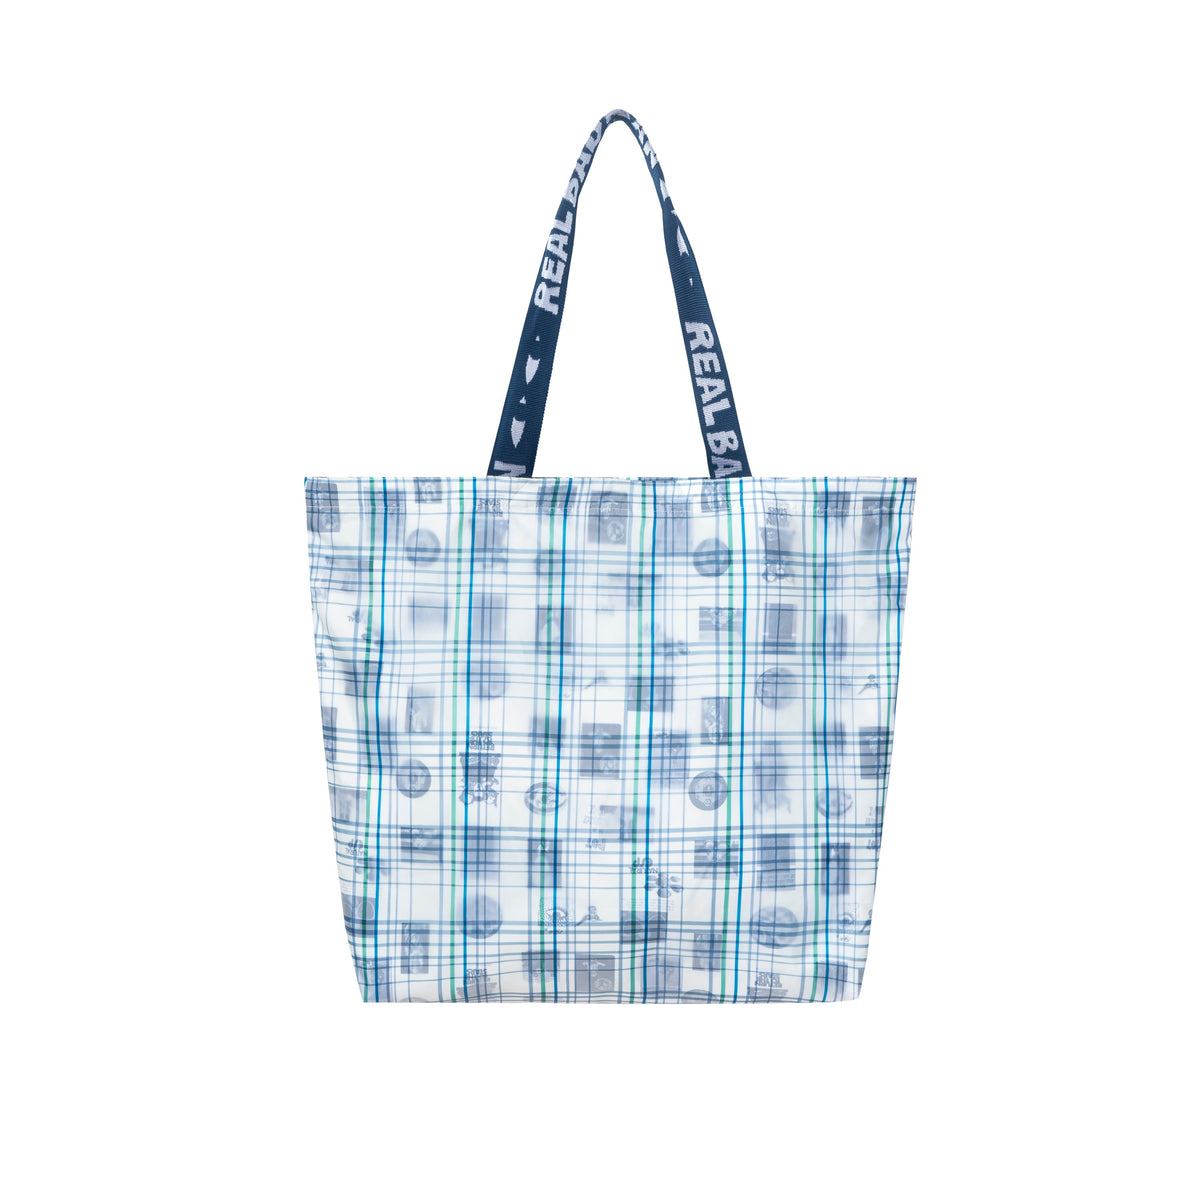 DOUBLE VISION TOTE